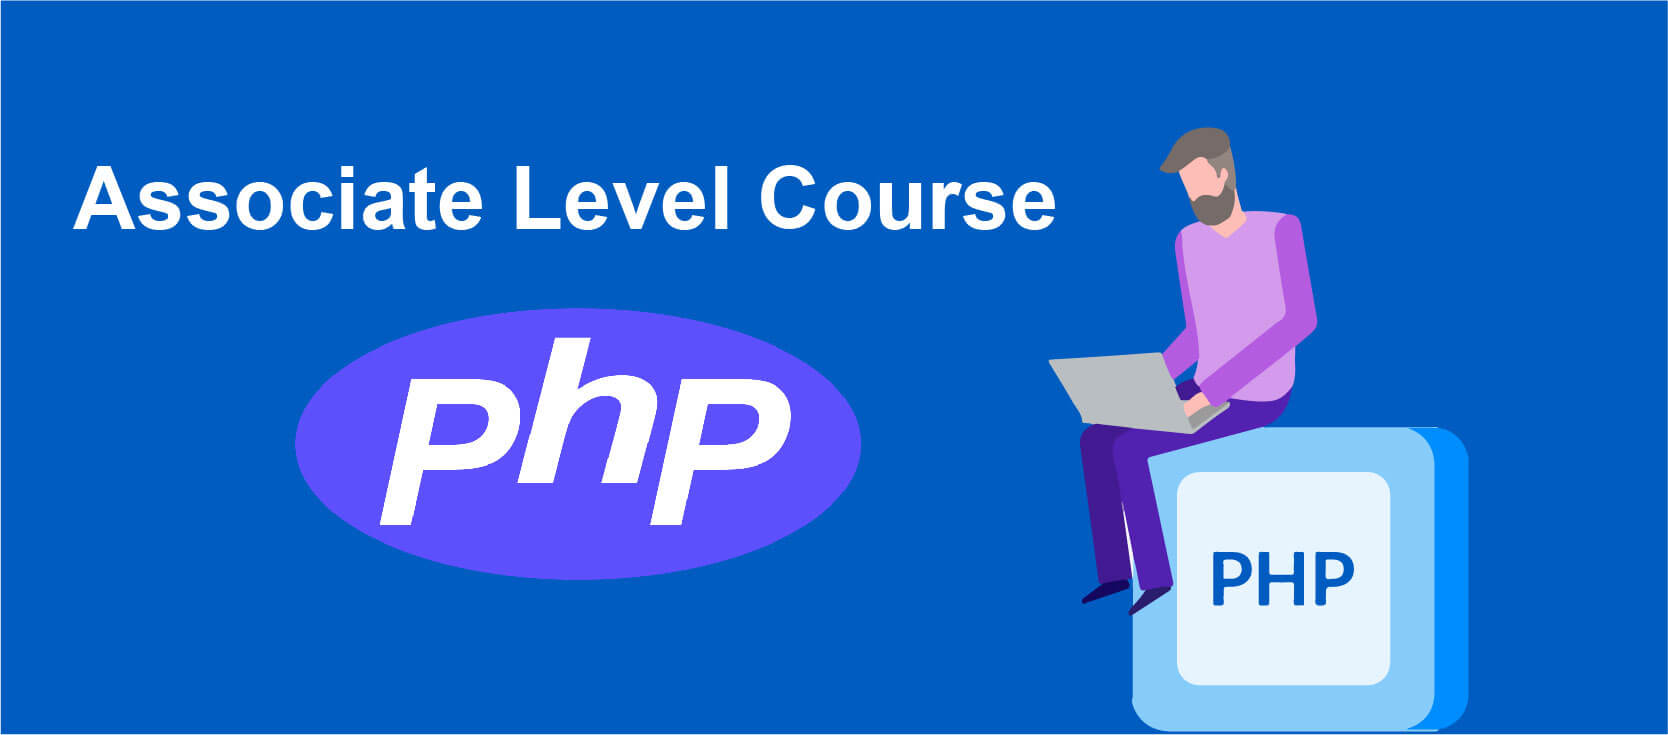 Associate Level Course in PHP